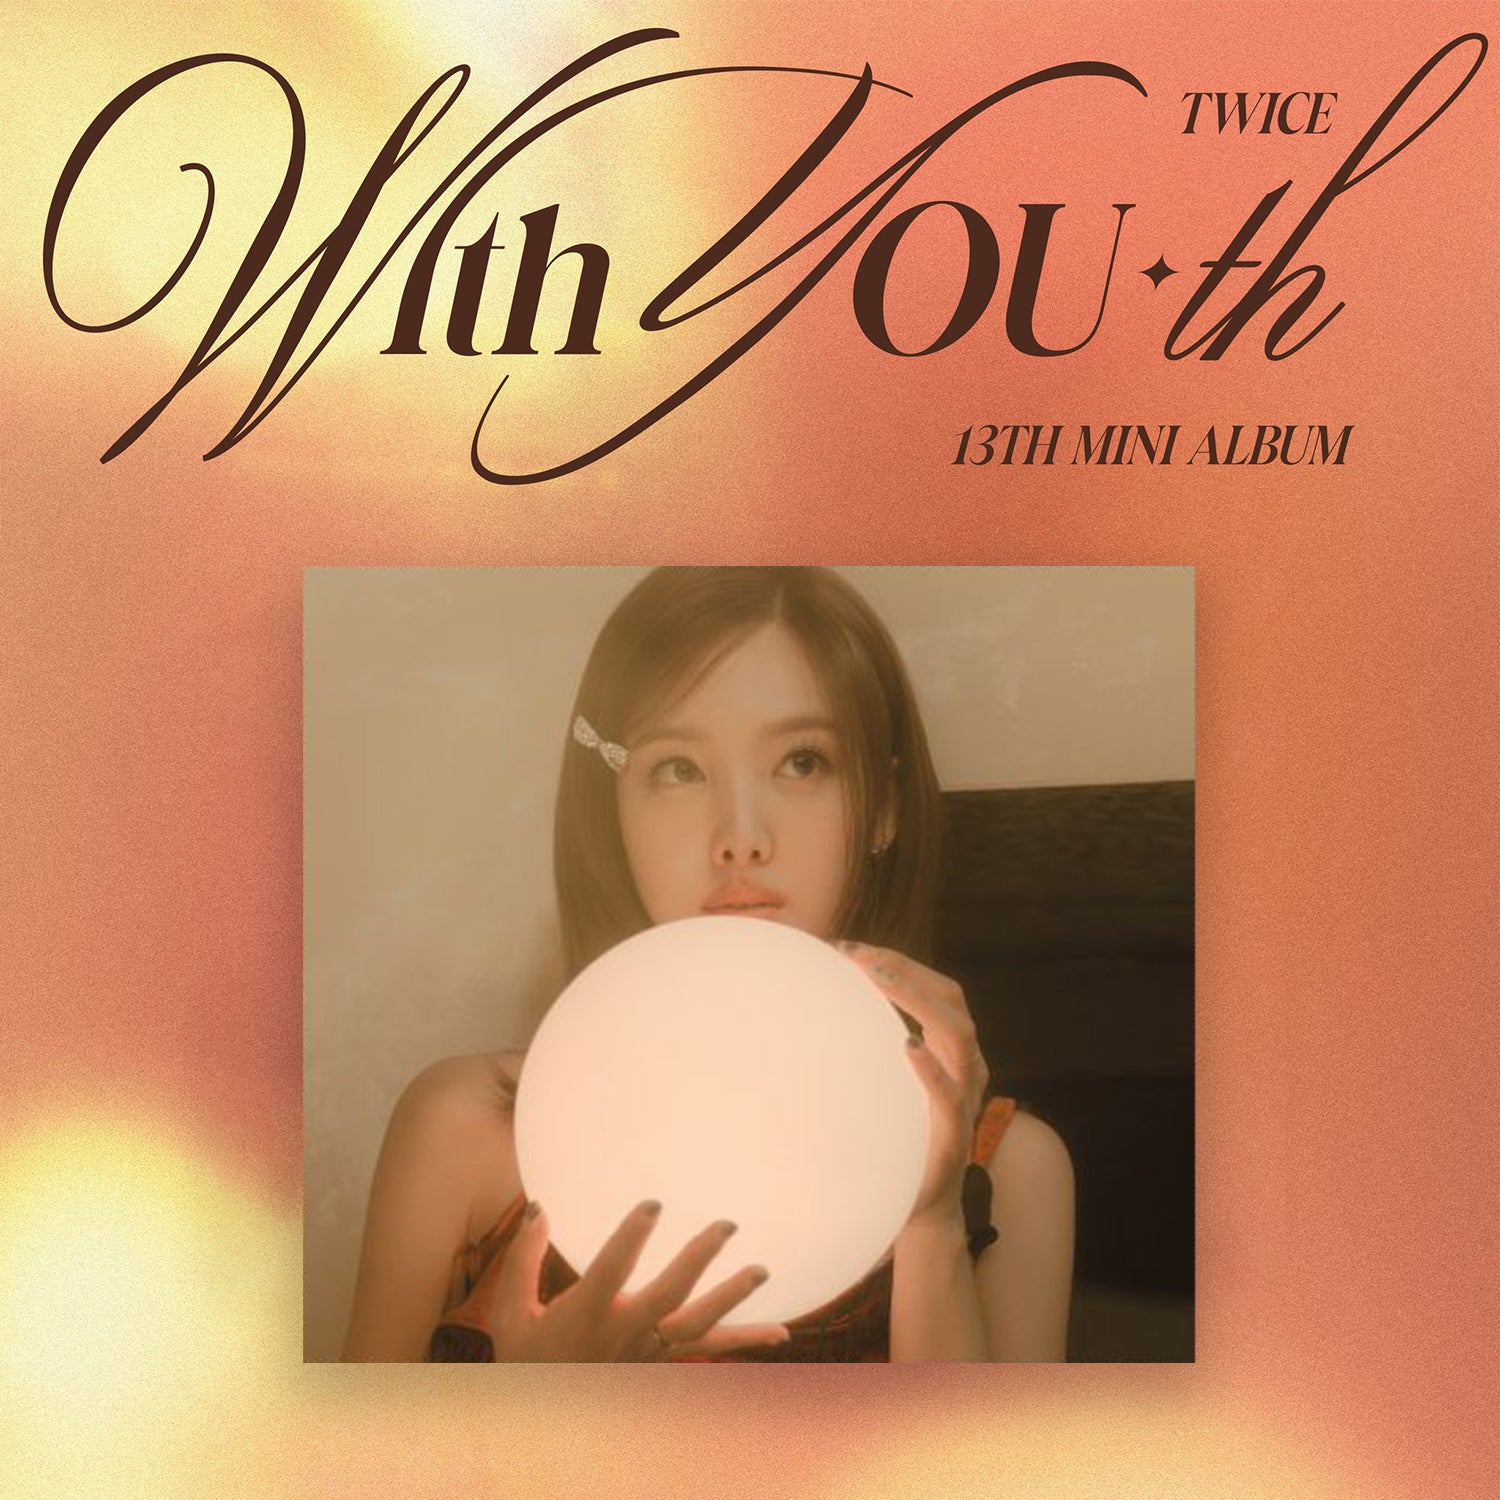 TWICE 13TH MINI ALBUM 'WITH YOU-TH' (DIGIPACK) NAYEON VERSION COVER